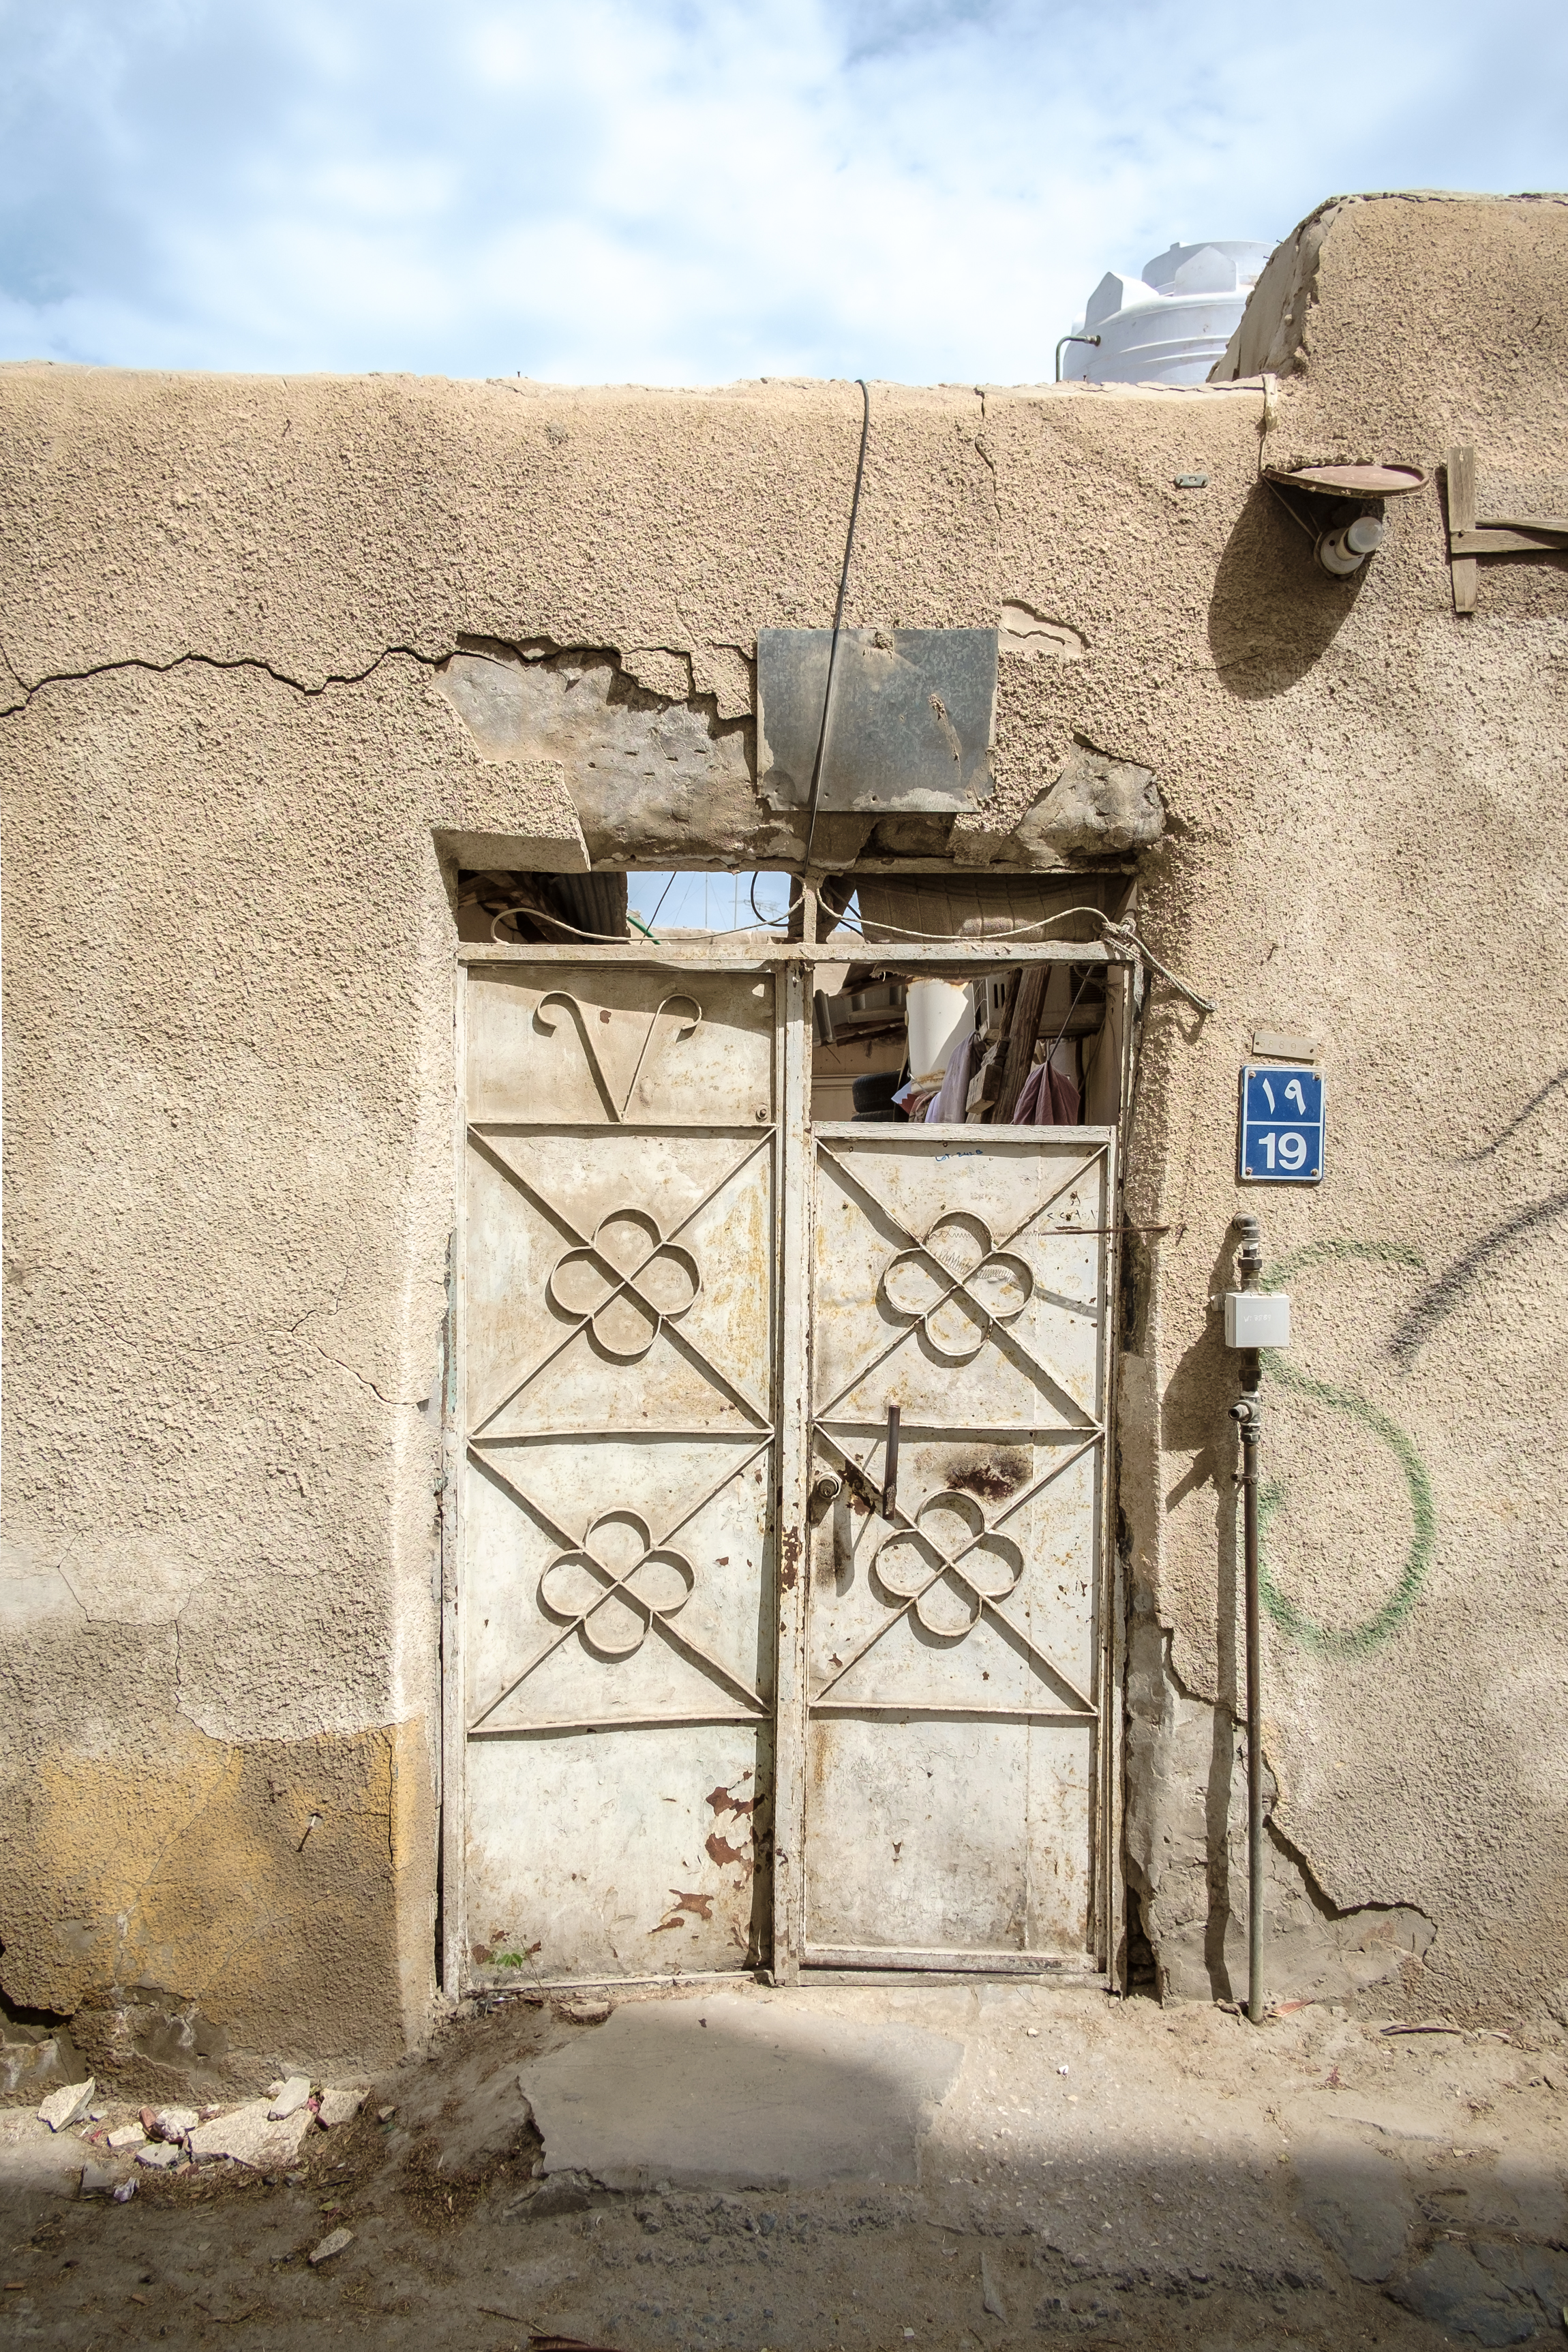  The door of a residential compound in the old Musheireb neighborhood of Doha. Much of this neighborhood has been torn down, and the residents forcibly removed, in order to build the New Msheireb development. Qatar is in a race to revitalize and mode